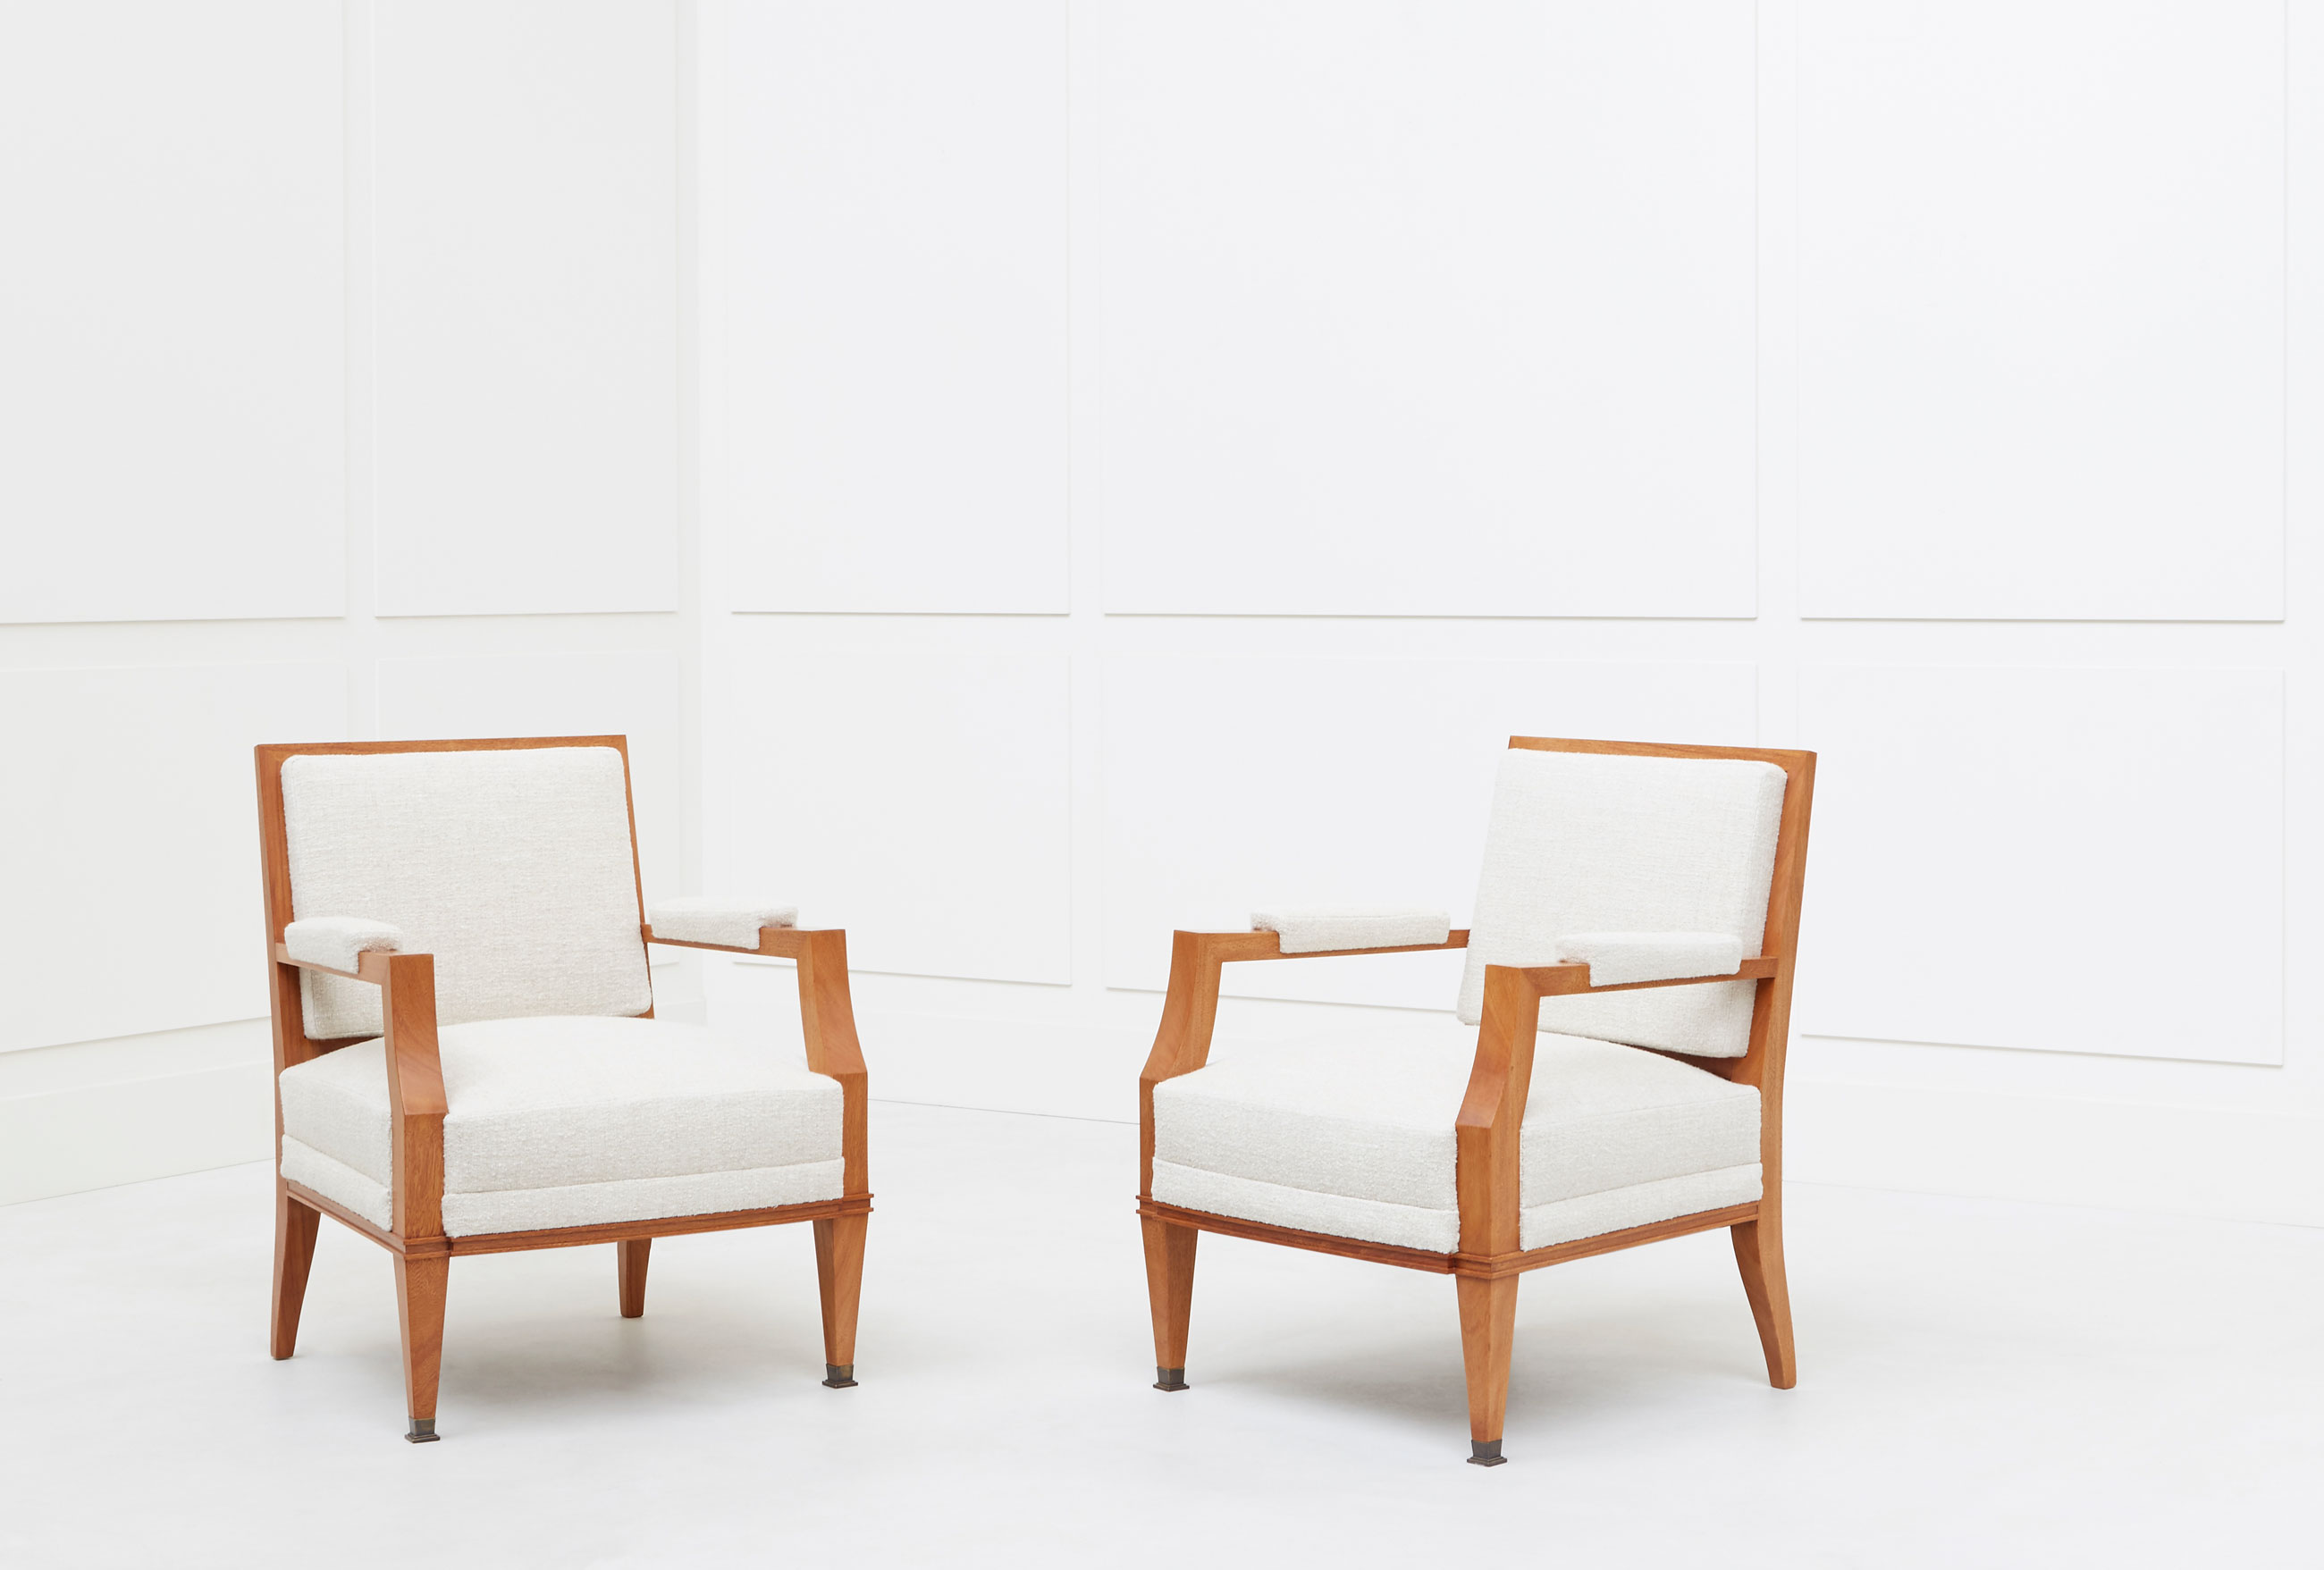 Jacques Quinet, Pair of armchairs, vue 02